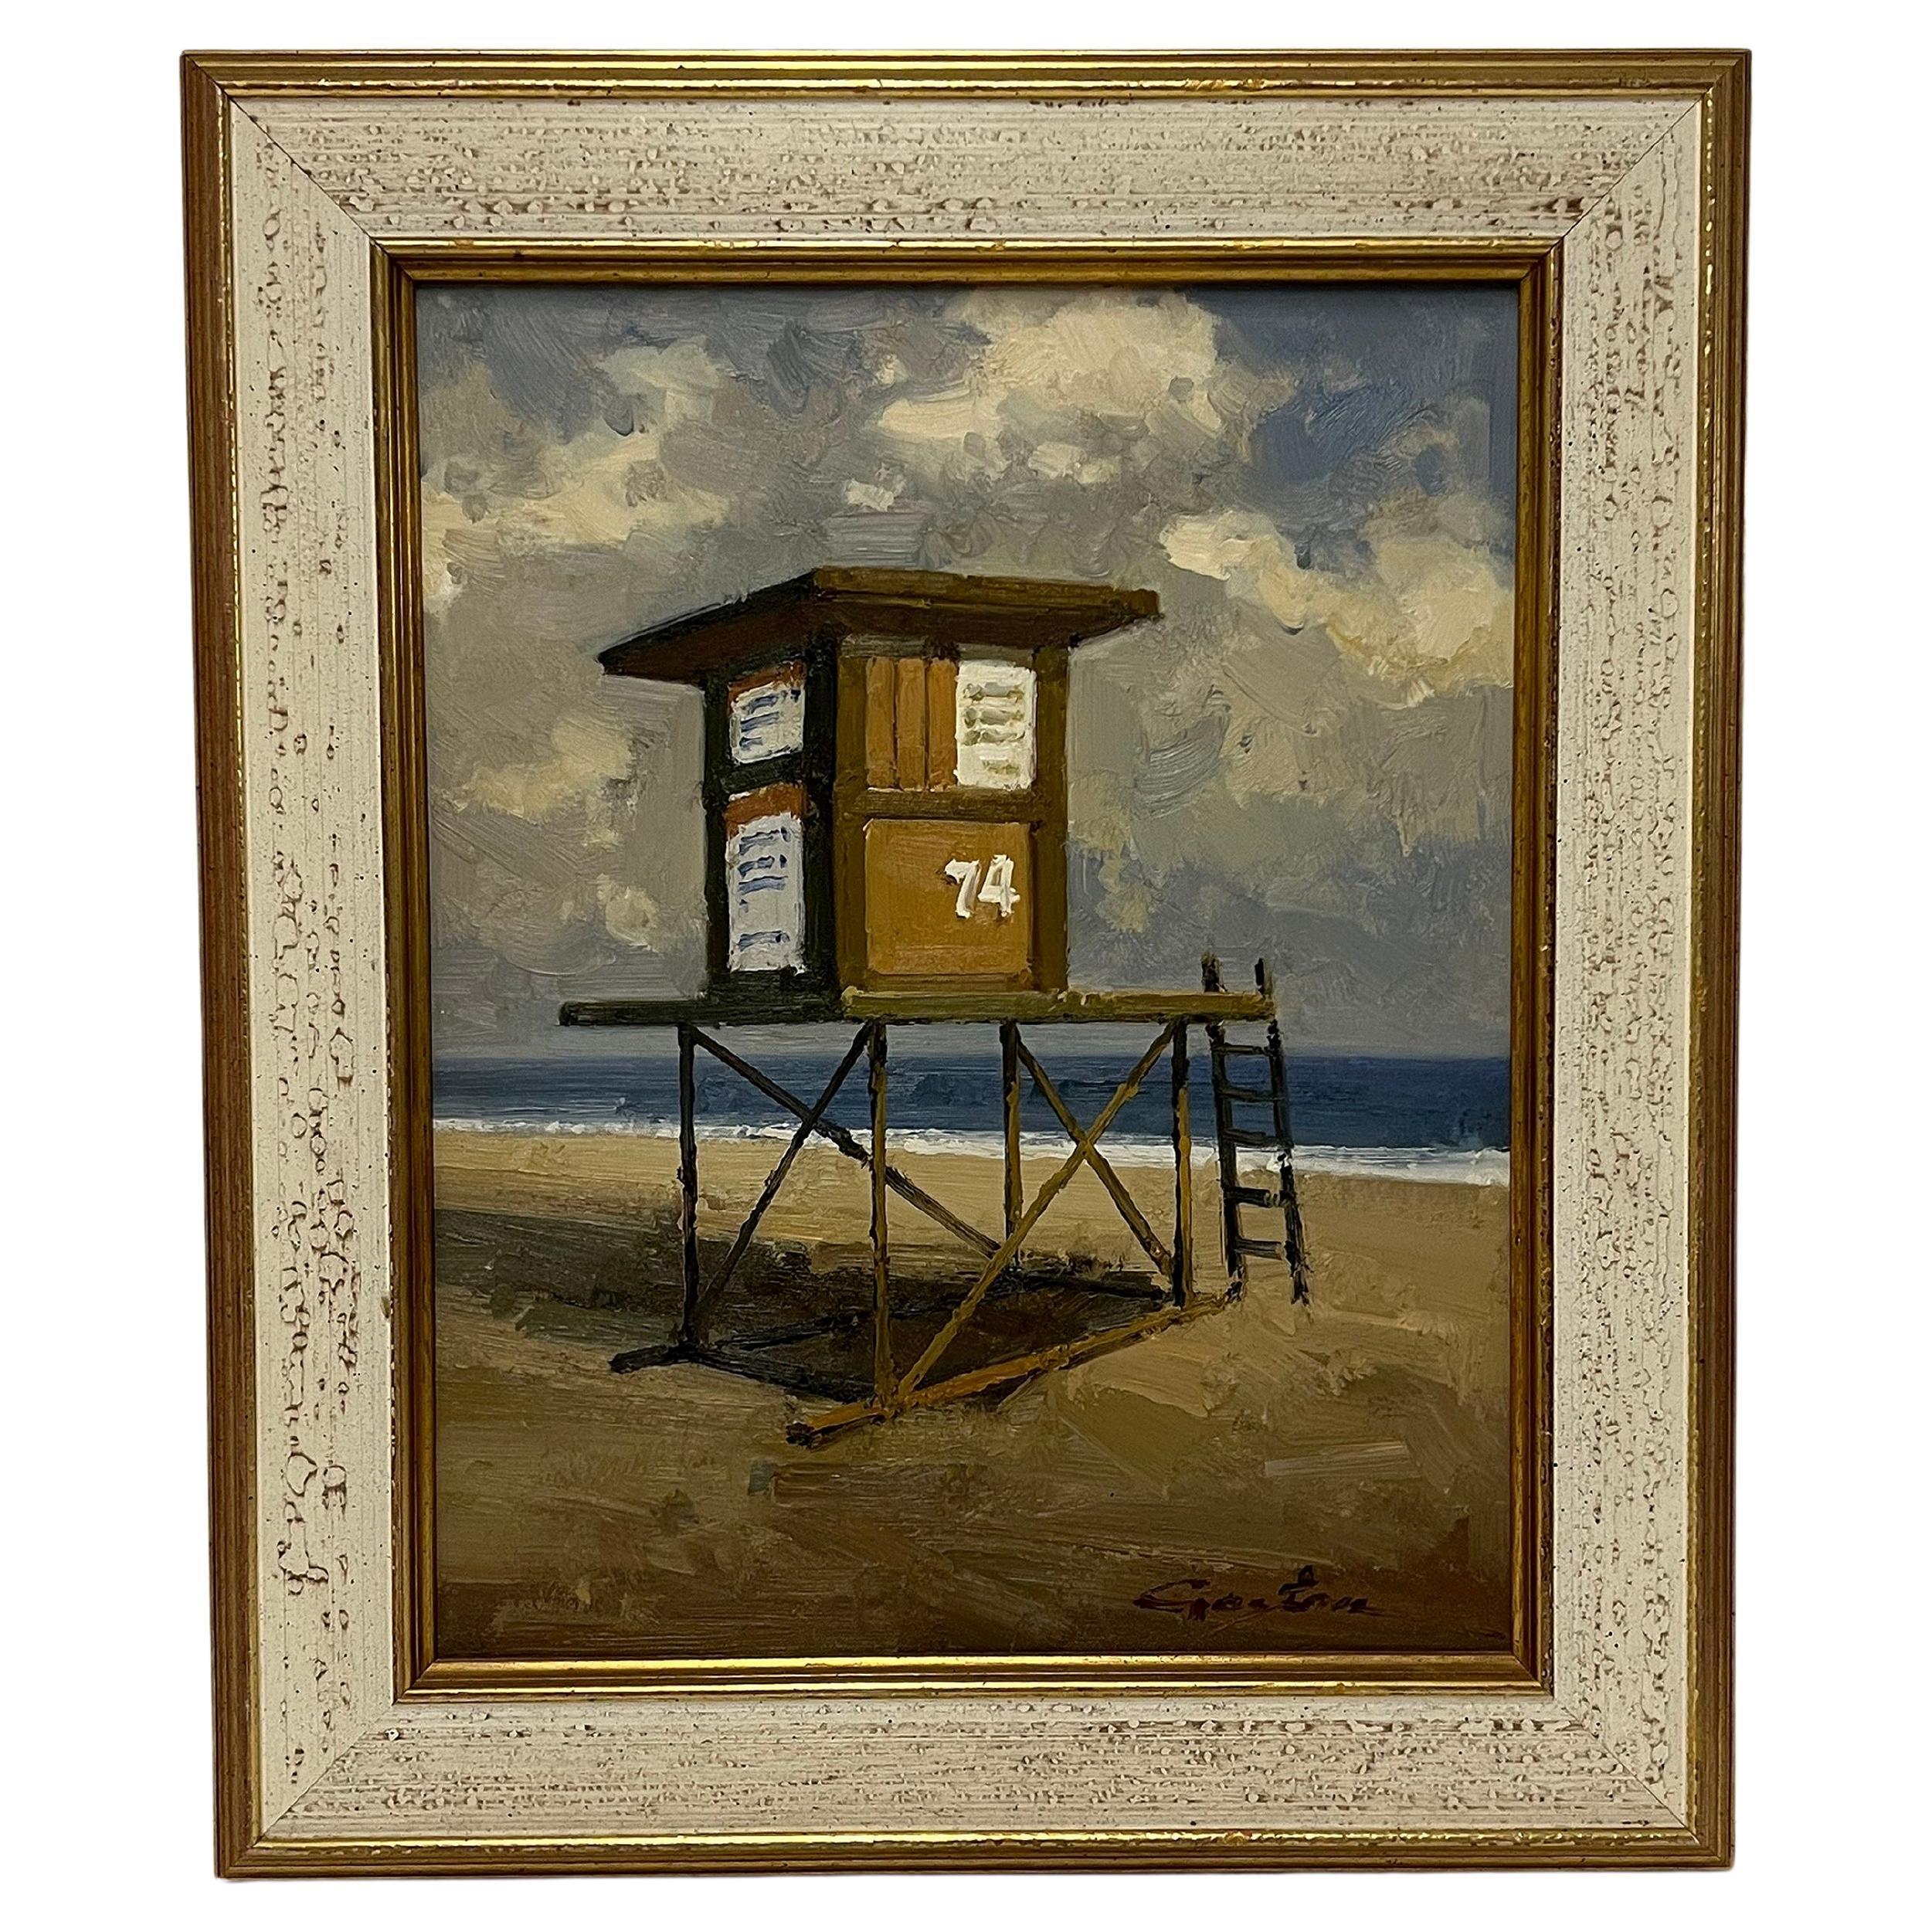 Newport Beach Lifeguard Tower #74 - Signed Oil on Canvas For Sale